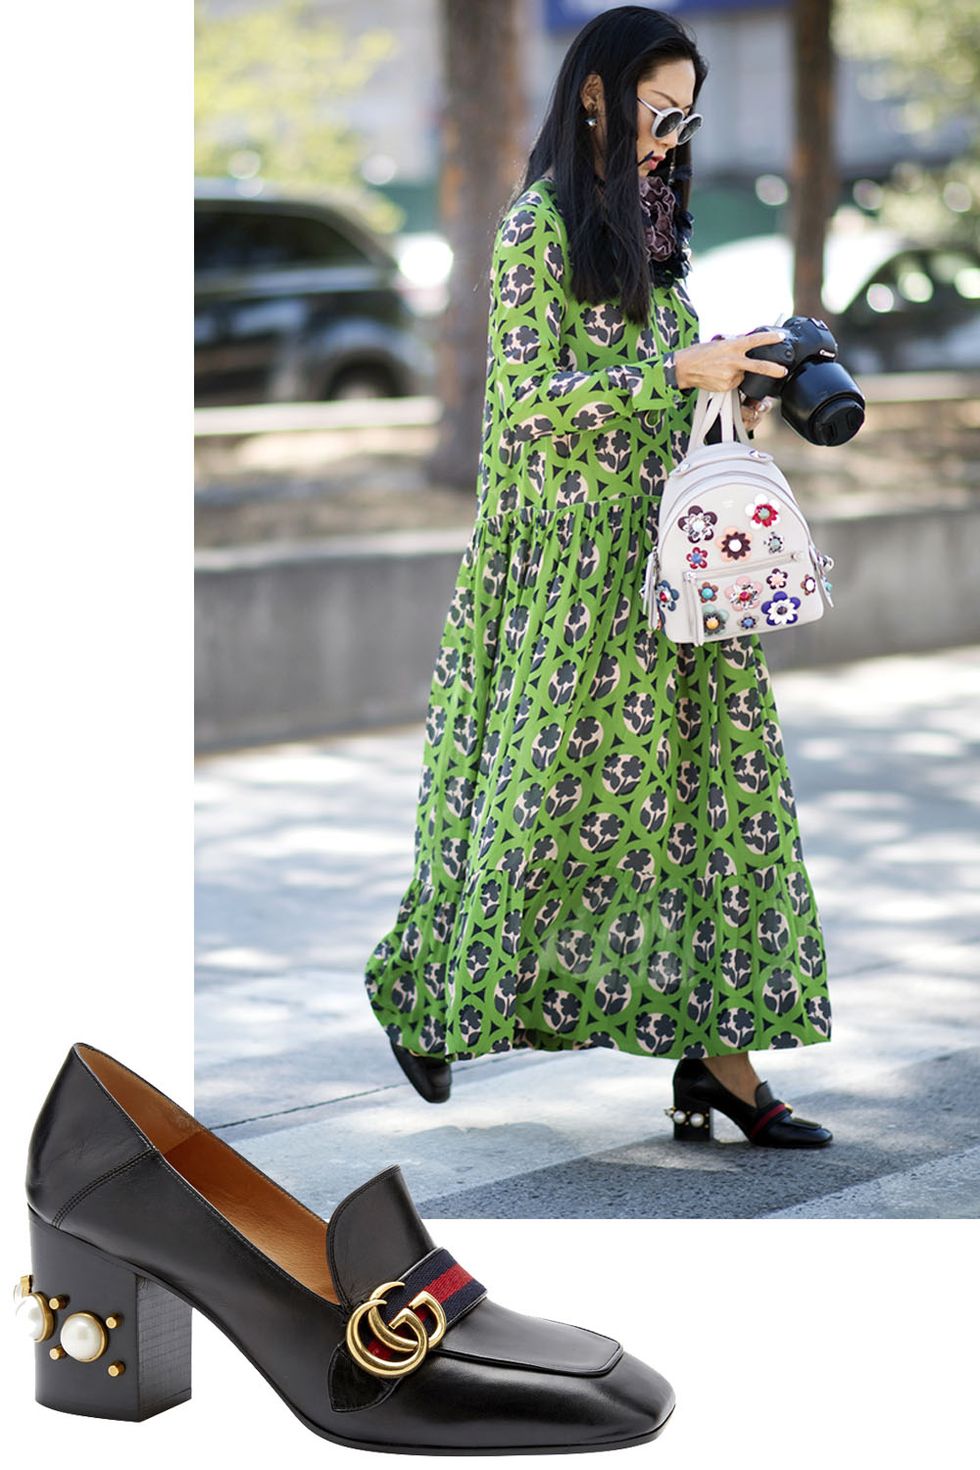 <p>Spotted with dresses and denim, the loafer was the "comfy" shoe of choice.&nbsp;</p><p><em data-verified="redactor" data-redactor-tag="em">Gucci loafer, $1,100, <strong data-redactor-tag="strong" data-verified="redactor"><a href="https://shop.harpersbazaar.com/designers/g/gucci/peyton-malaga-kid-mid-height-moccasin-7948.html" target="_blank">shopBAZAAR.com</a></strong>.&nbsp;</em><br></p>